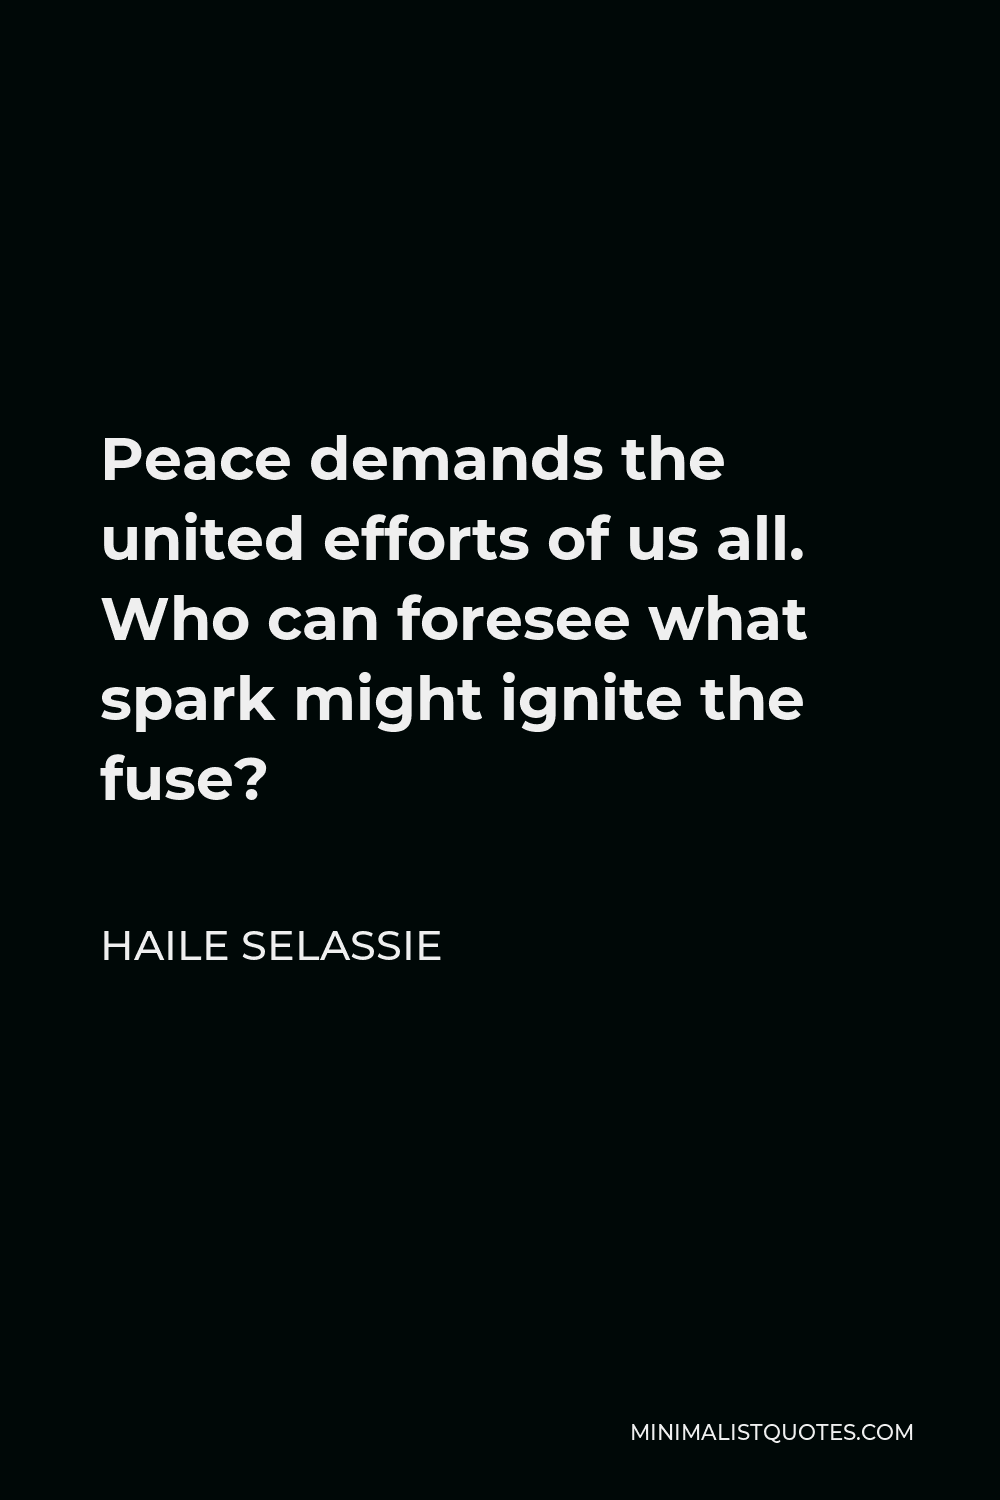 Haile Selassie Quote - Peace demands the united efforts of us all. Who can foresee what spark might ignite the fuse?